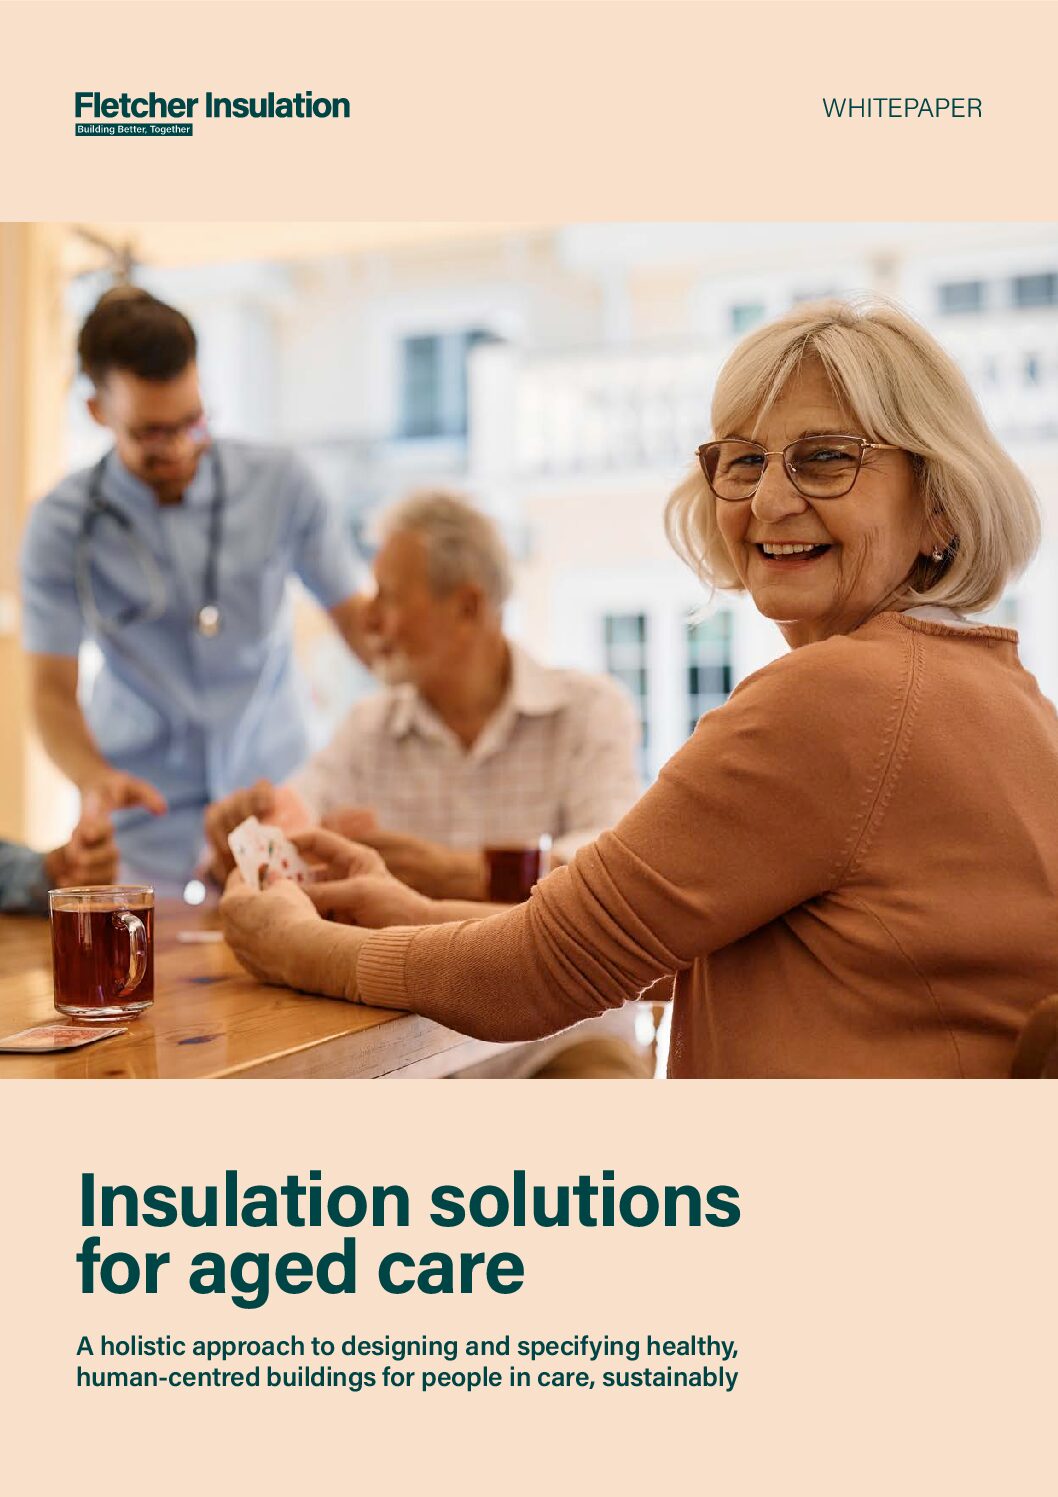 Whitepaper – Insulation Solutions for Aged Care